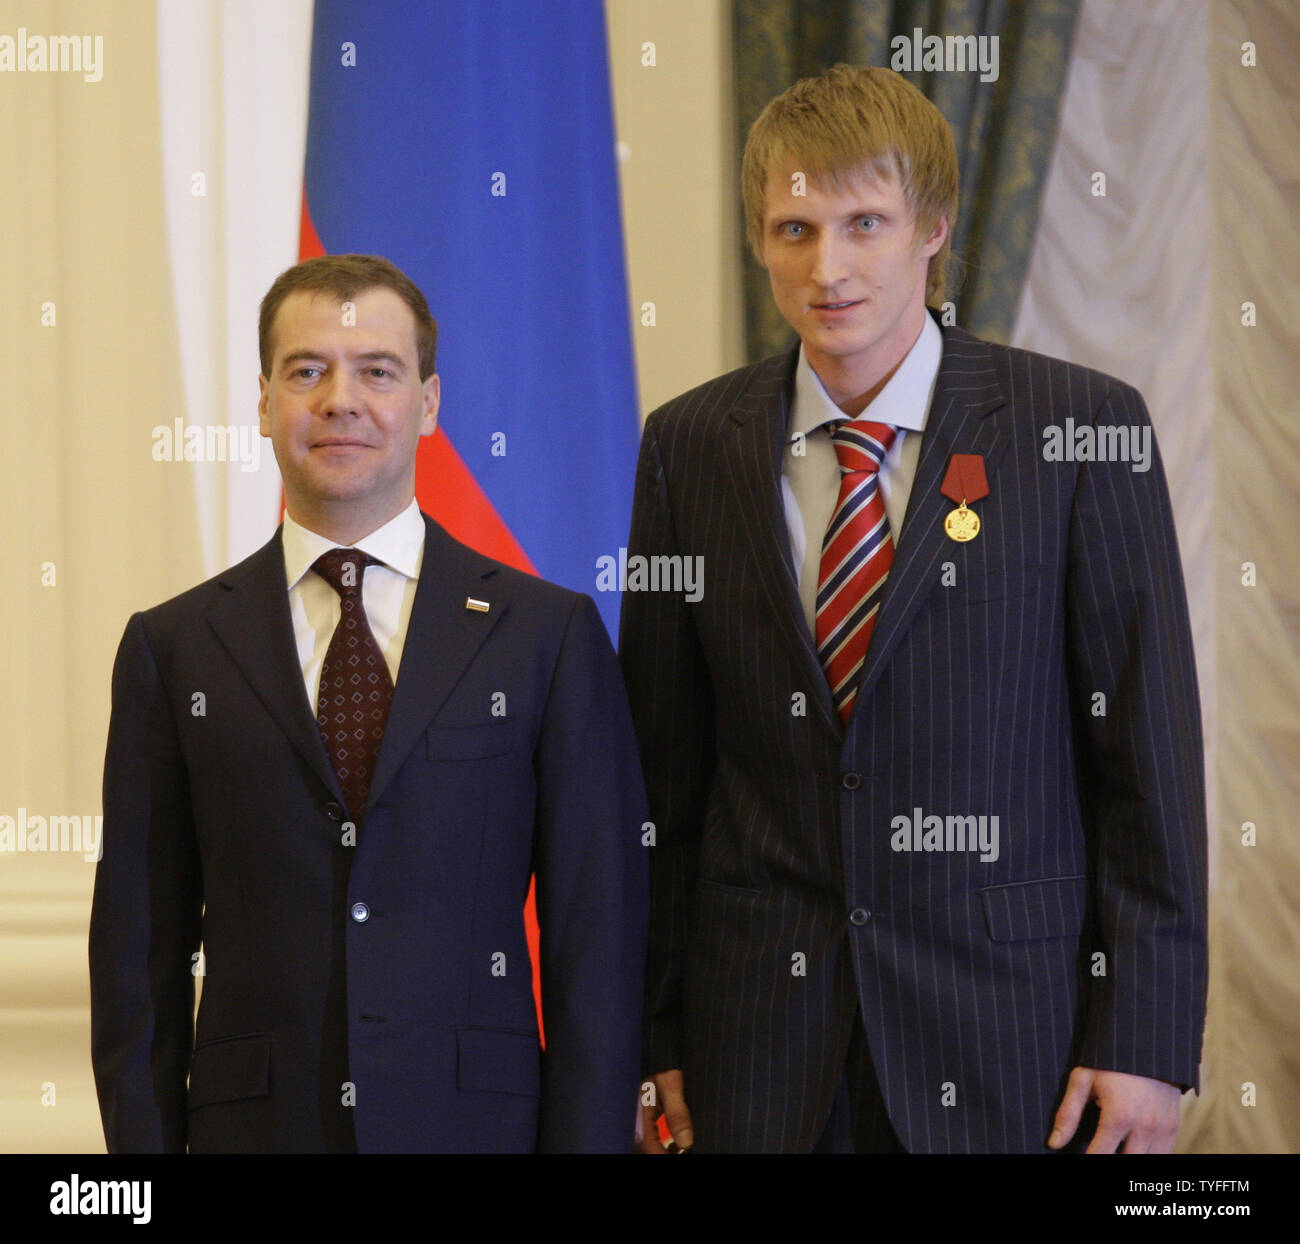 Russian President Dmitry Medvedev (L) presents the Order of Merit for the Fatherland, first class, to speed skater Ivan Skobrev in the Kremlin in Moscow on March 15, 2010. Skobrev won silver and bronze medals at the Winter Olympic Games in Vancouver. UPI/Alex Natin Stock Photo